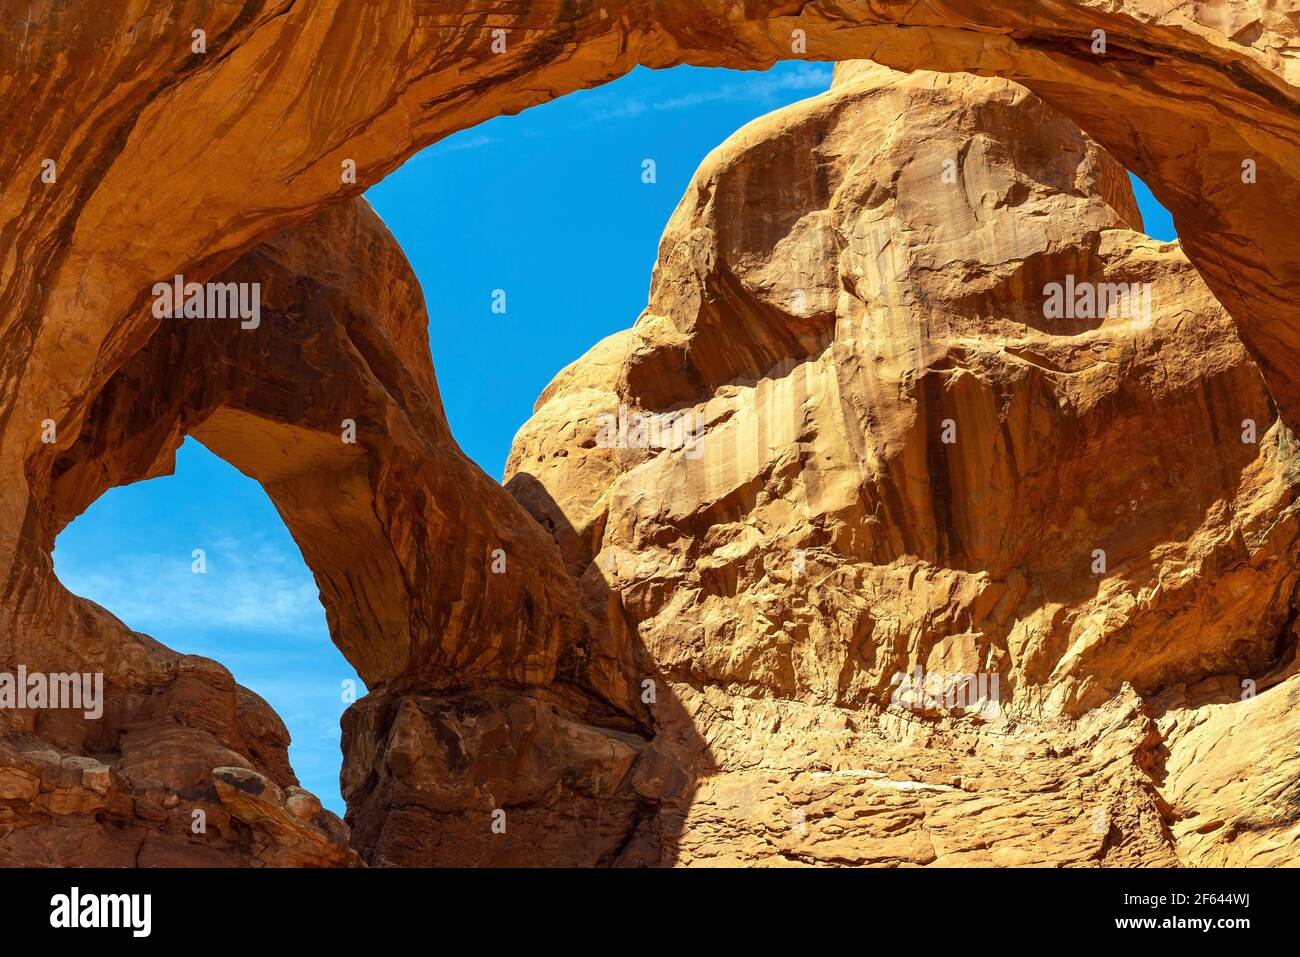 Double arch geological formation, Arches national park, Utah, United States of America (USA). Stock Photo